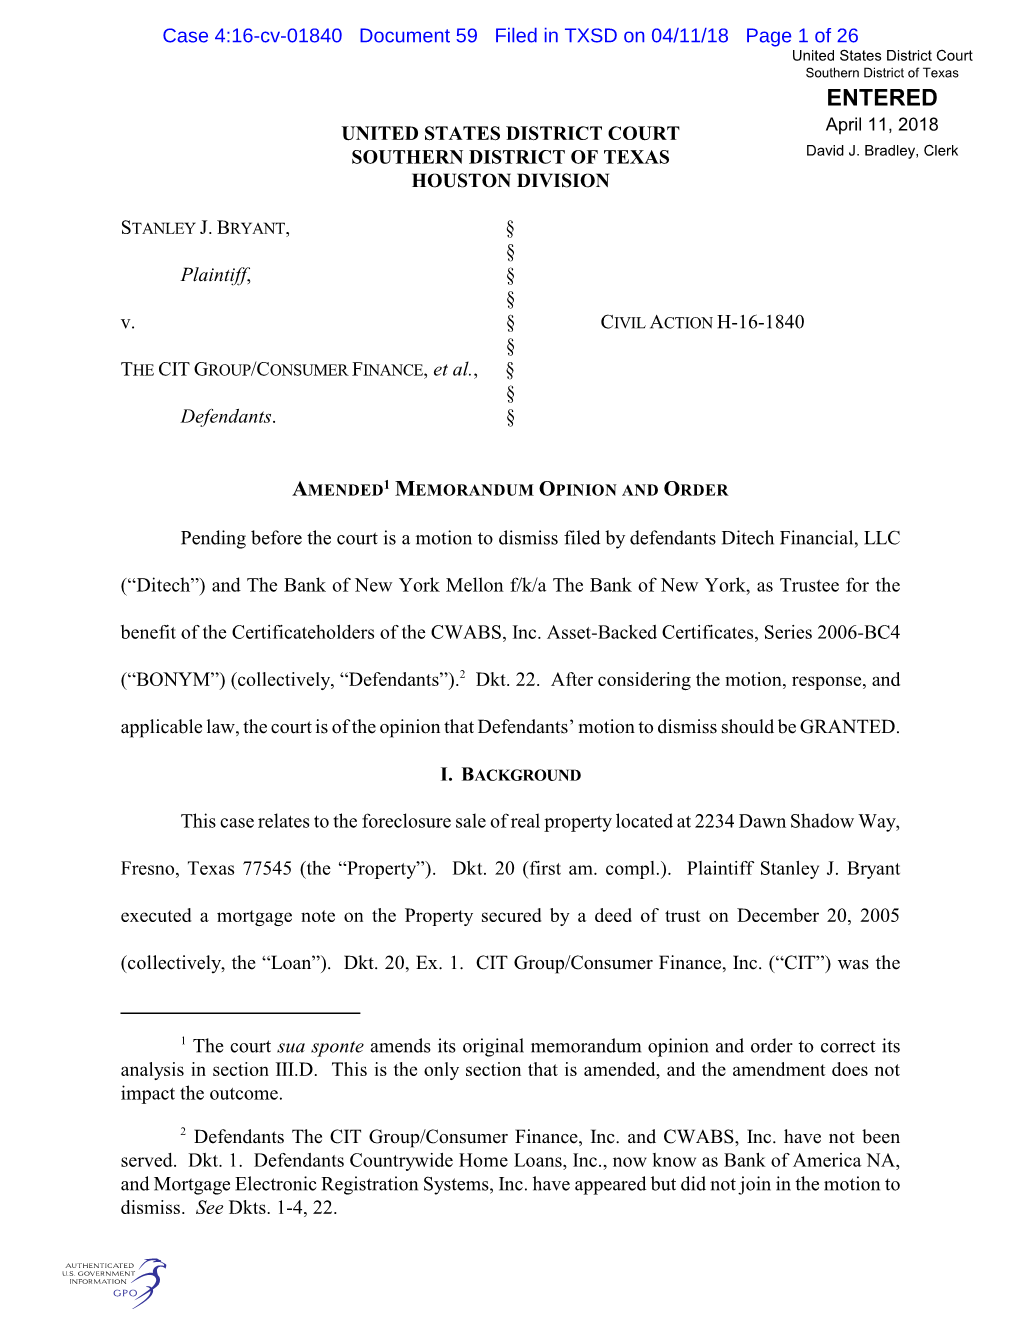 Case 4:16-Cv-01840 Document 59 Filed in TXSD on 04/11/18 Page 1 of 26